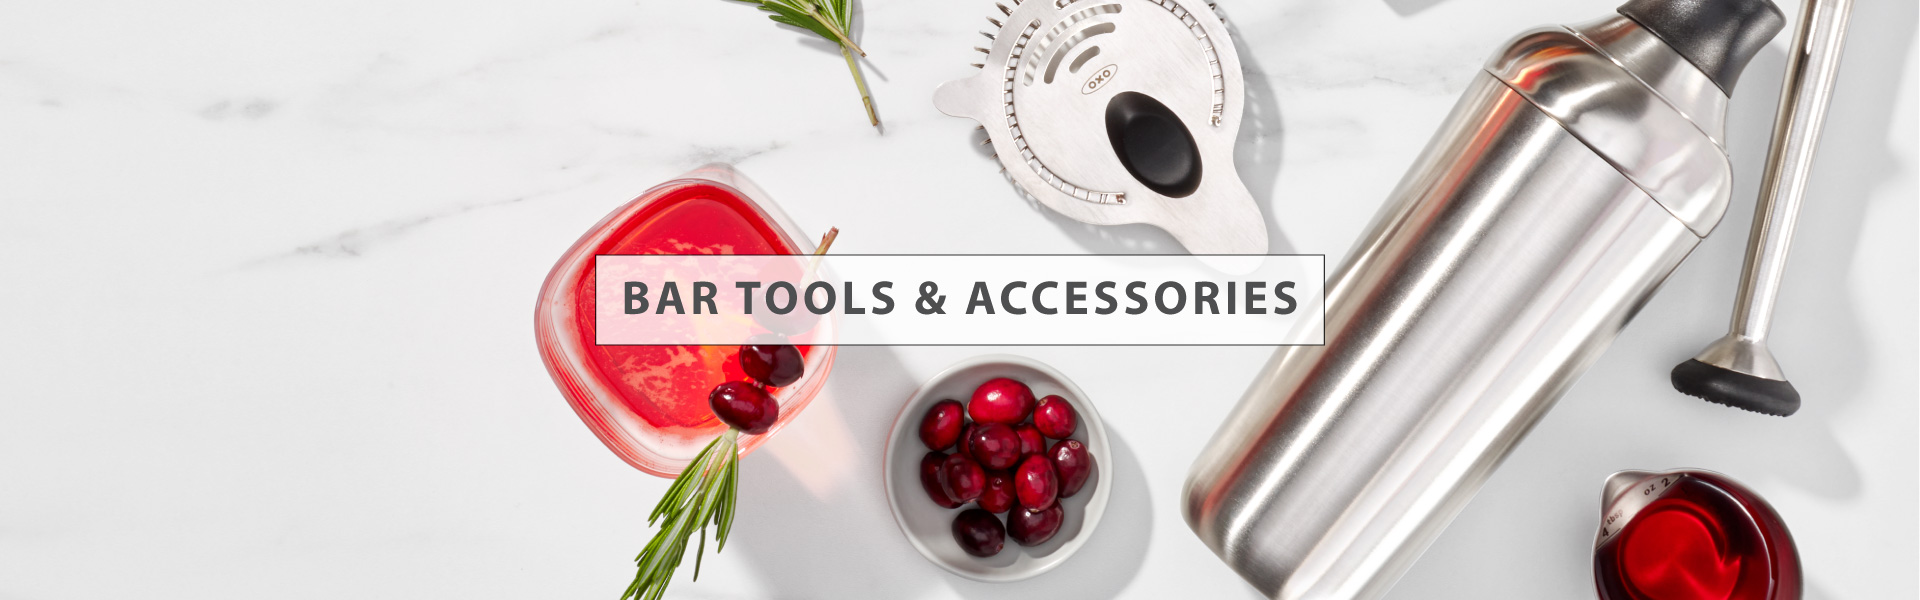 Bar Accessories Category